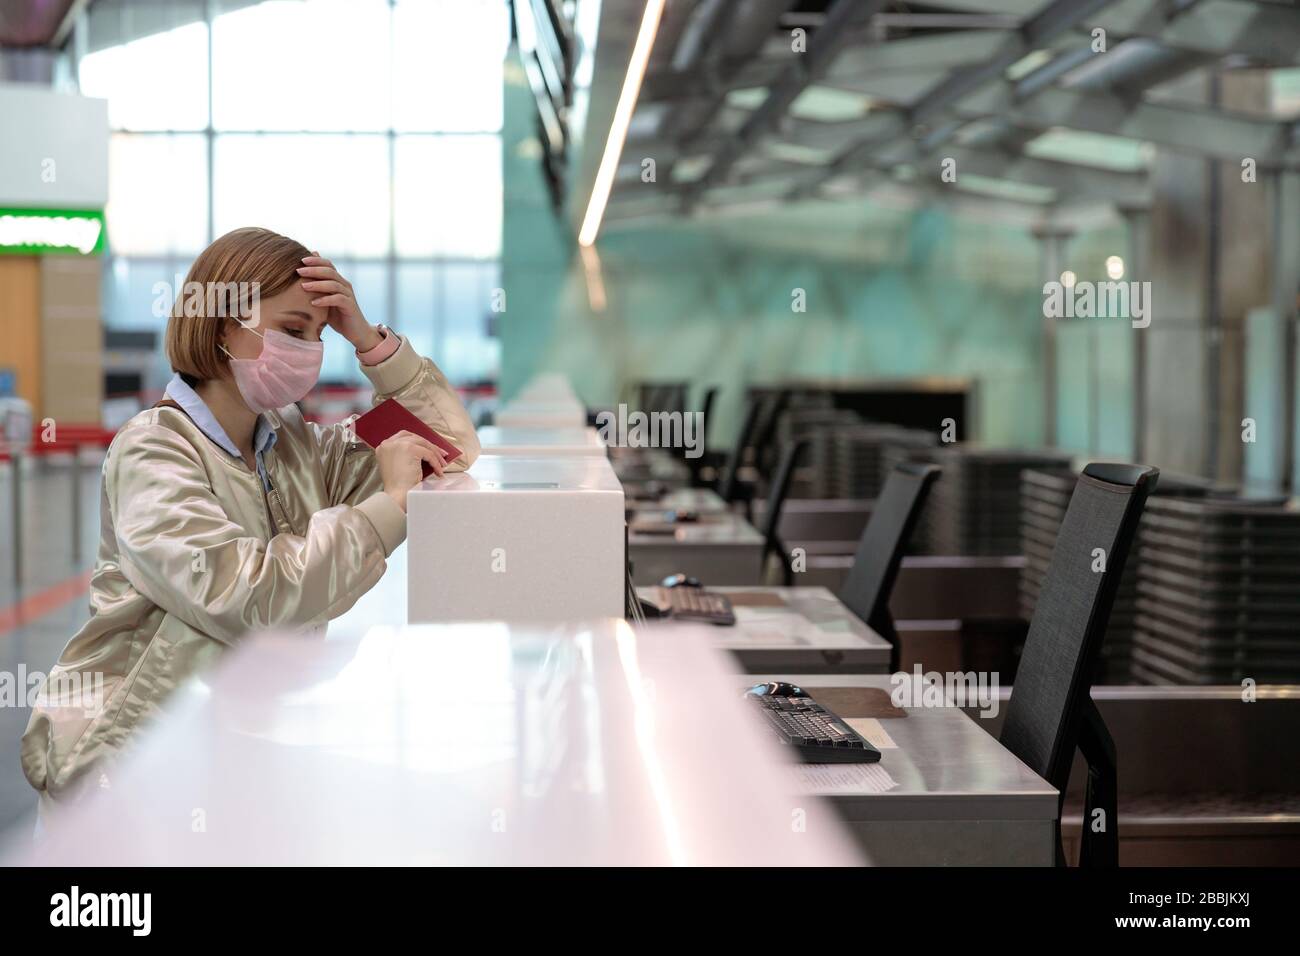 Woman with luggage over flight cancellation, stands at empty check-in counters at airport terminal due to coronavirus pandemic/Covid-19 outbreak trave Stock Photo